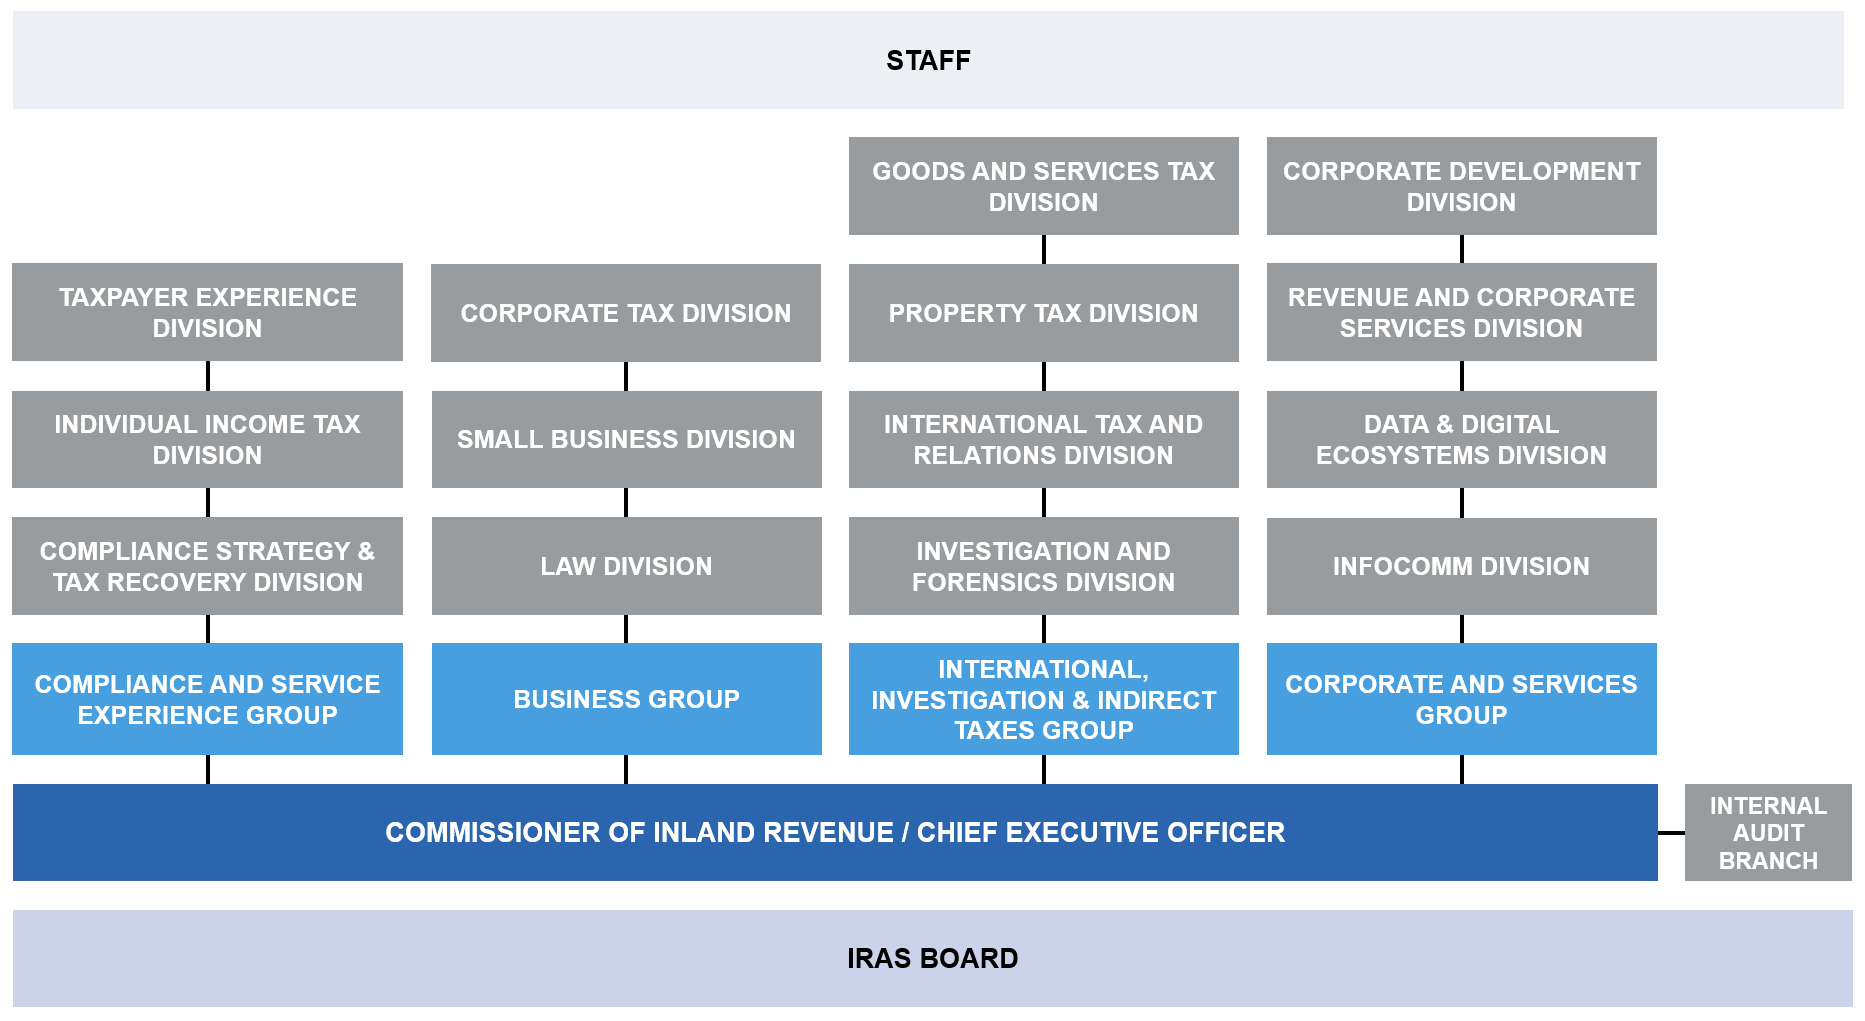 IRAS' organisation structure with effect from 1 Jan 2023